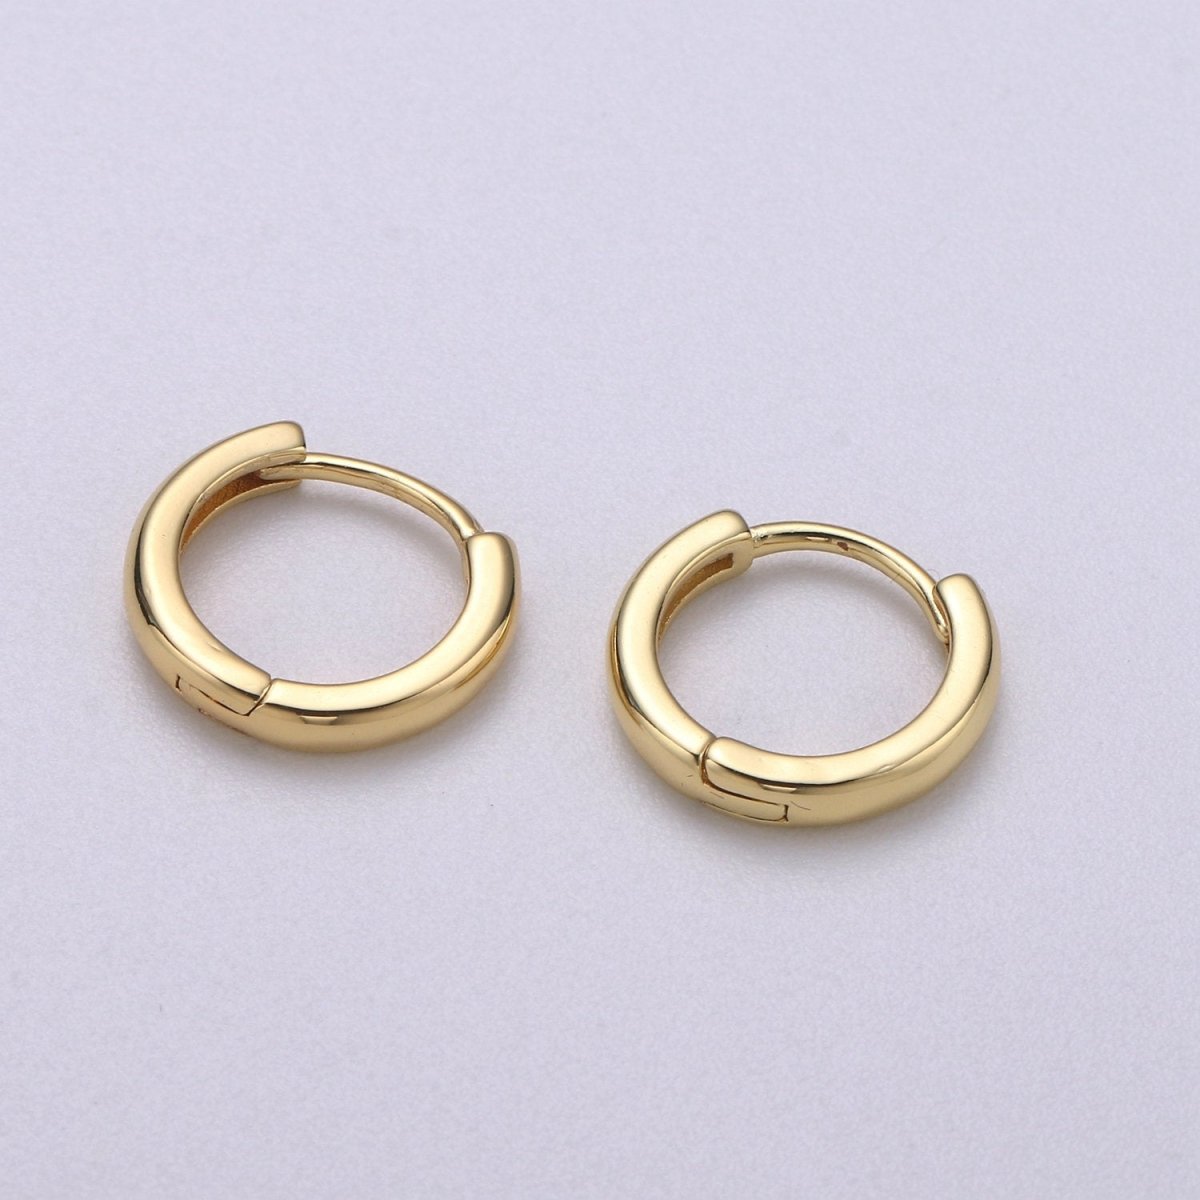 Dainty Hypoallergenic Cartilage Earrings Tiny Hoop Earrings 14K Gold Filled Hoop Tiny Hoop Earrings Small Huggie Minimalist Dainty Hoops for Gift idea Q-186 Q-224 Q-494 - DLUXCA